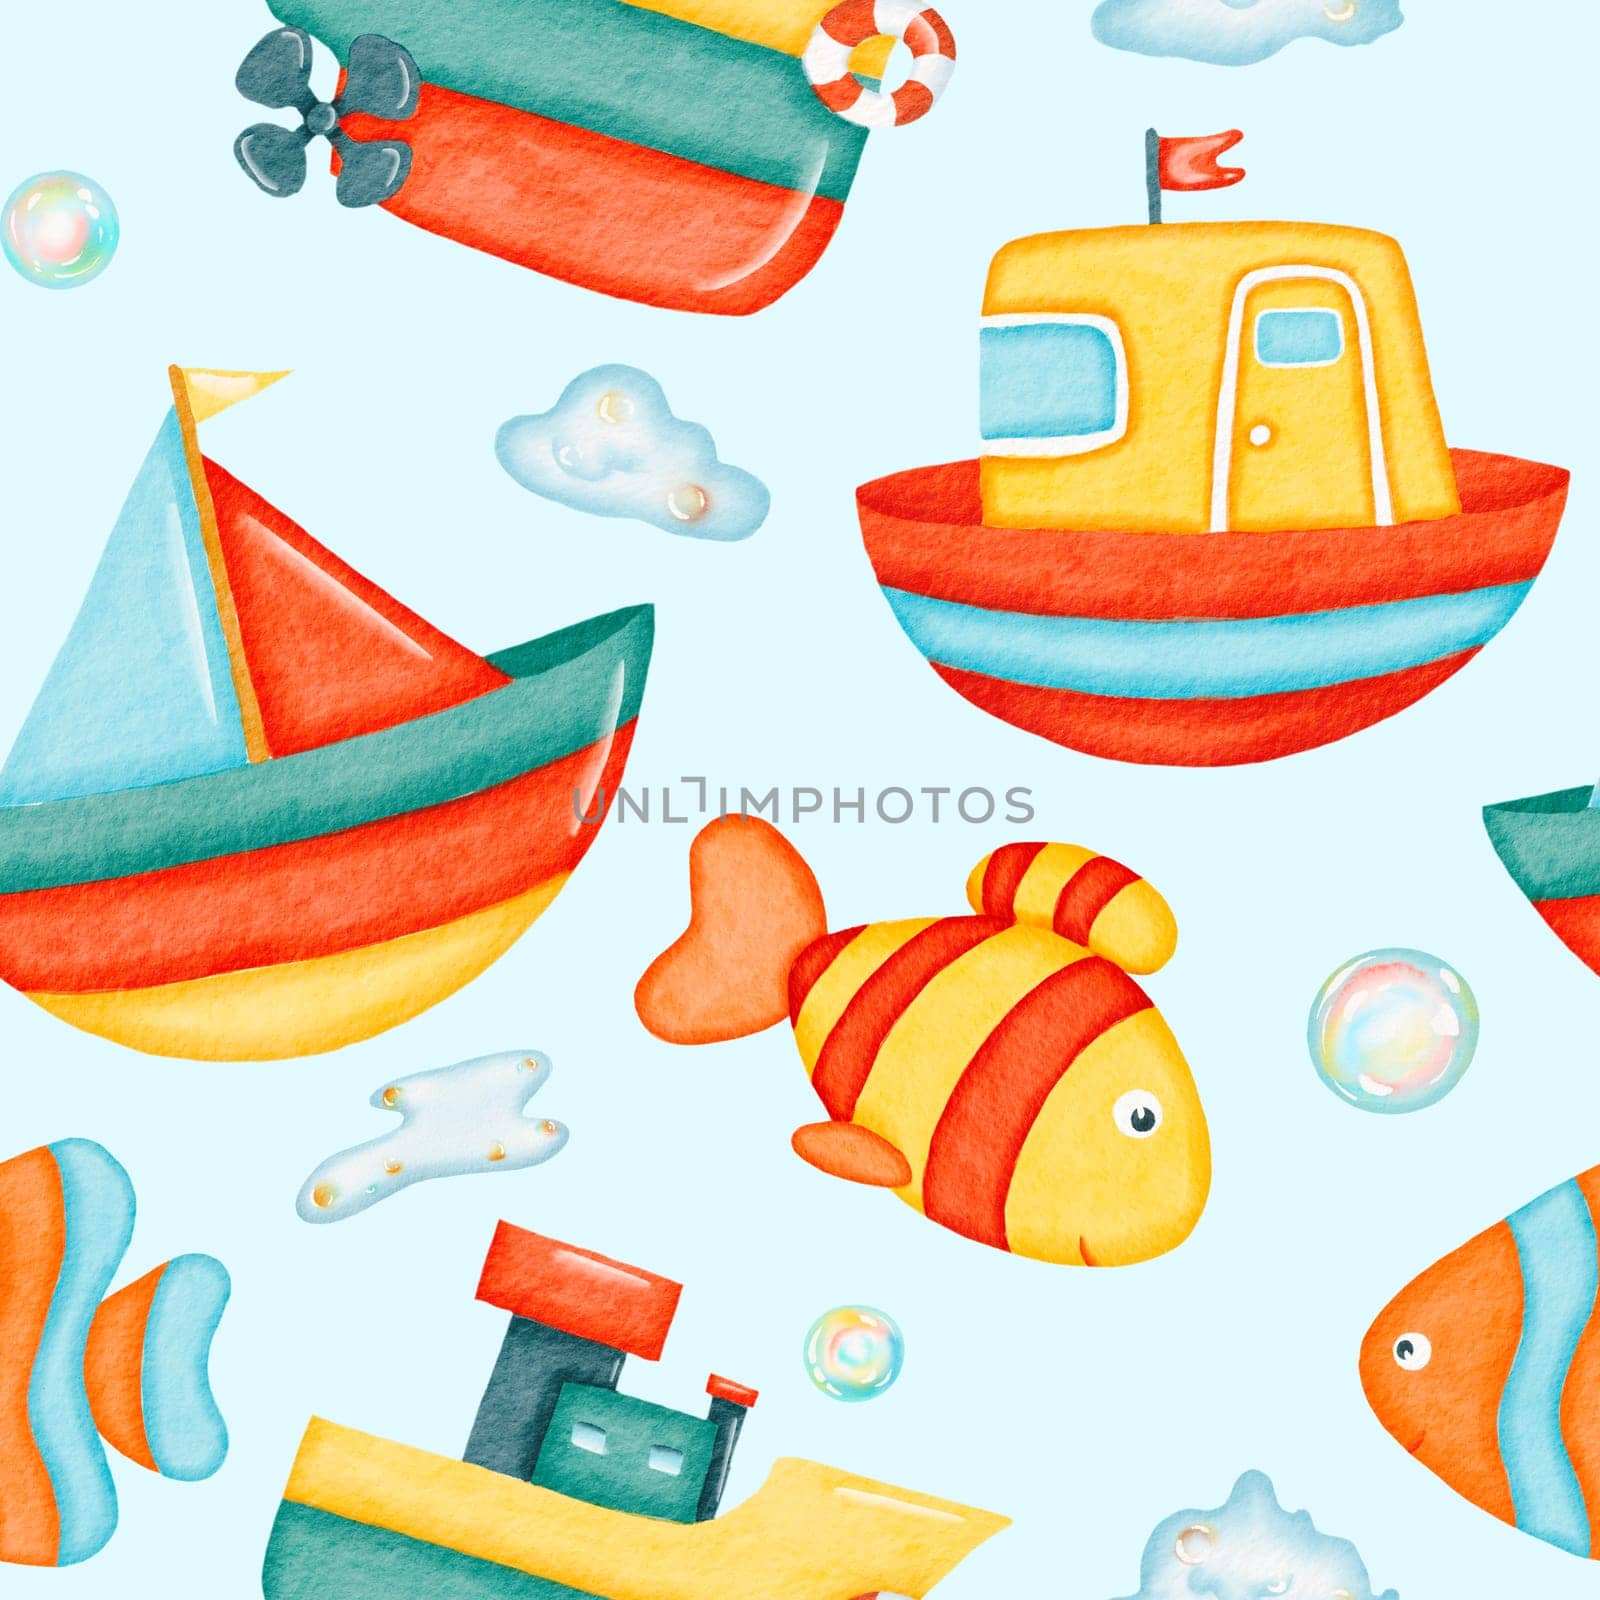 Watercolor seamless pattern. colorful fish, toy boats and colorful soap bubbles pattern. Bathroom background. Design for kids, children, textile, fabric, home decor. Painted ornament.